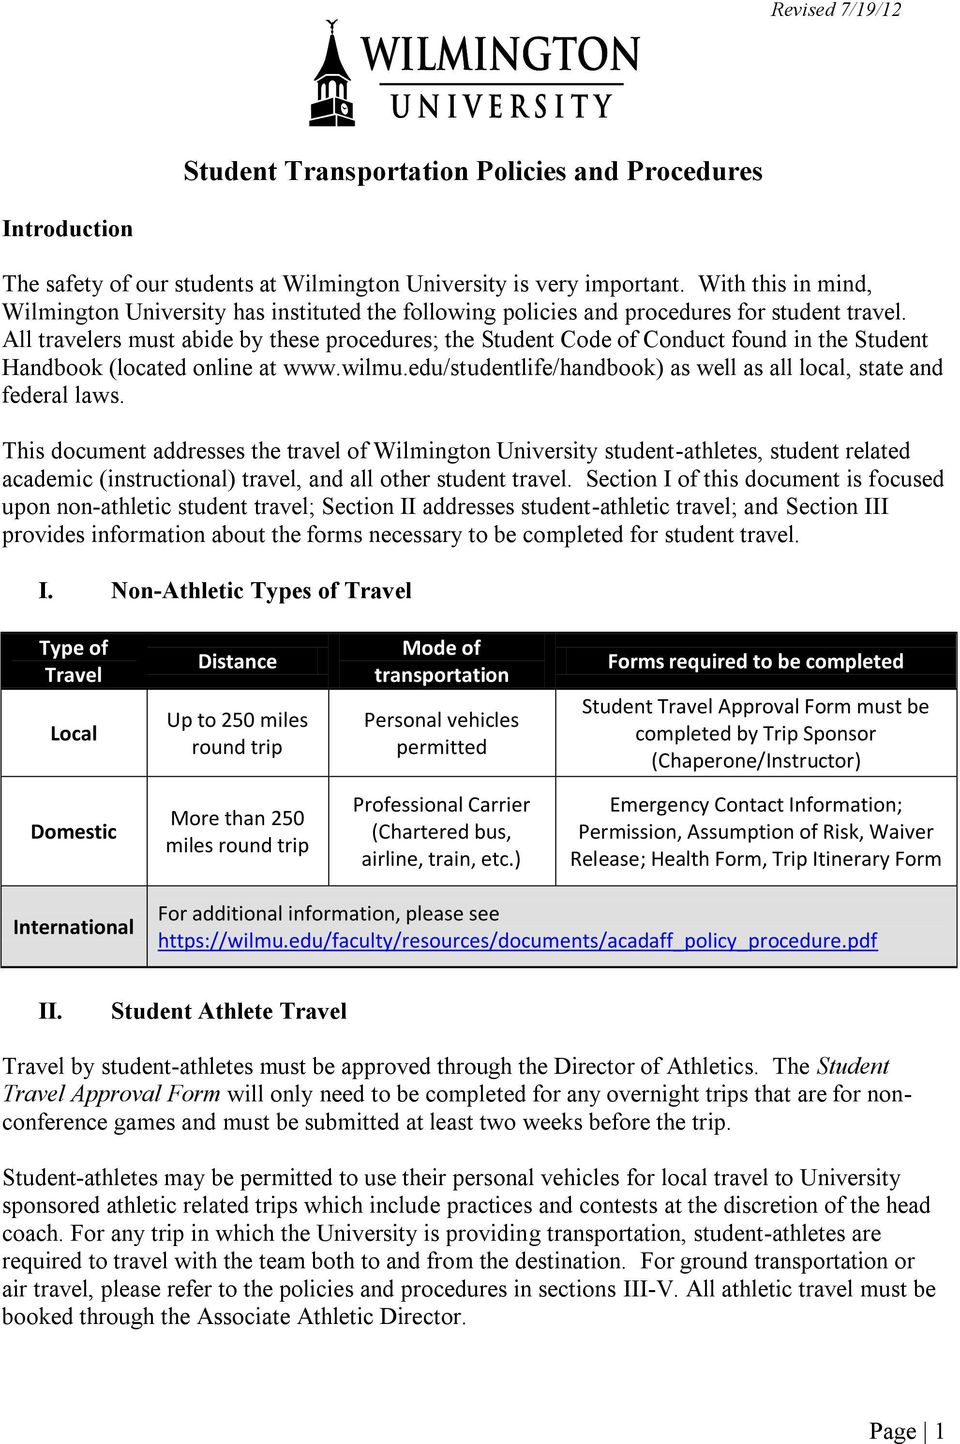 All travelers must abide by these procedures; the Student Code of Conduct found in the Student Handbook (located online at www.wilmu.